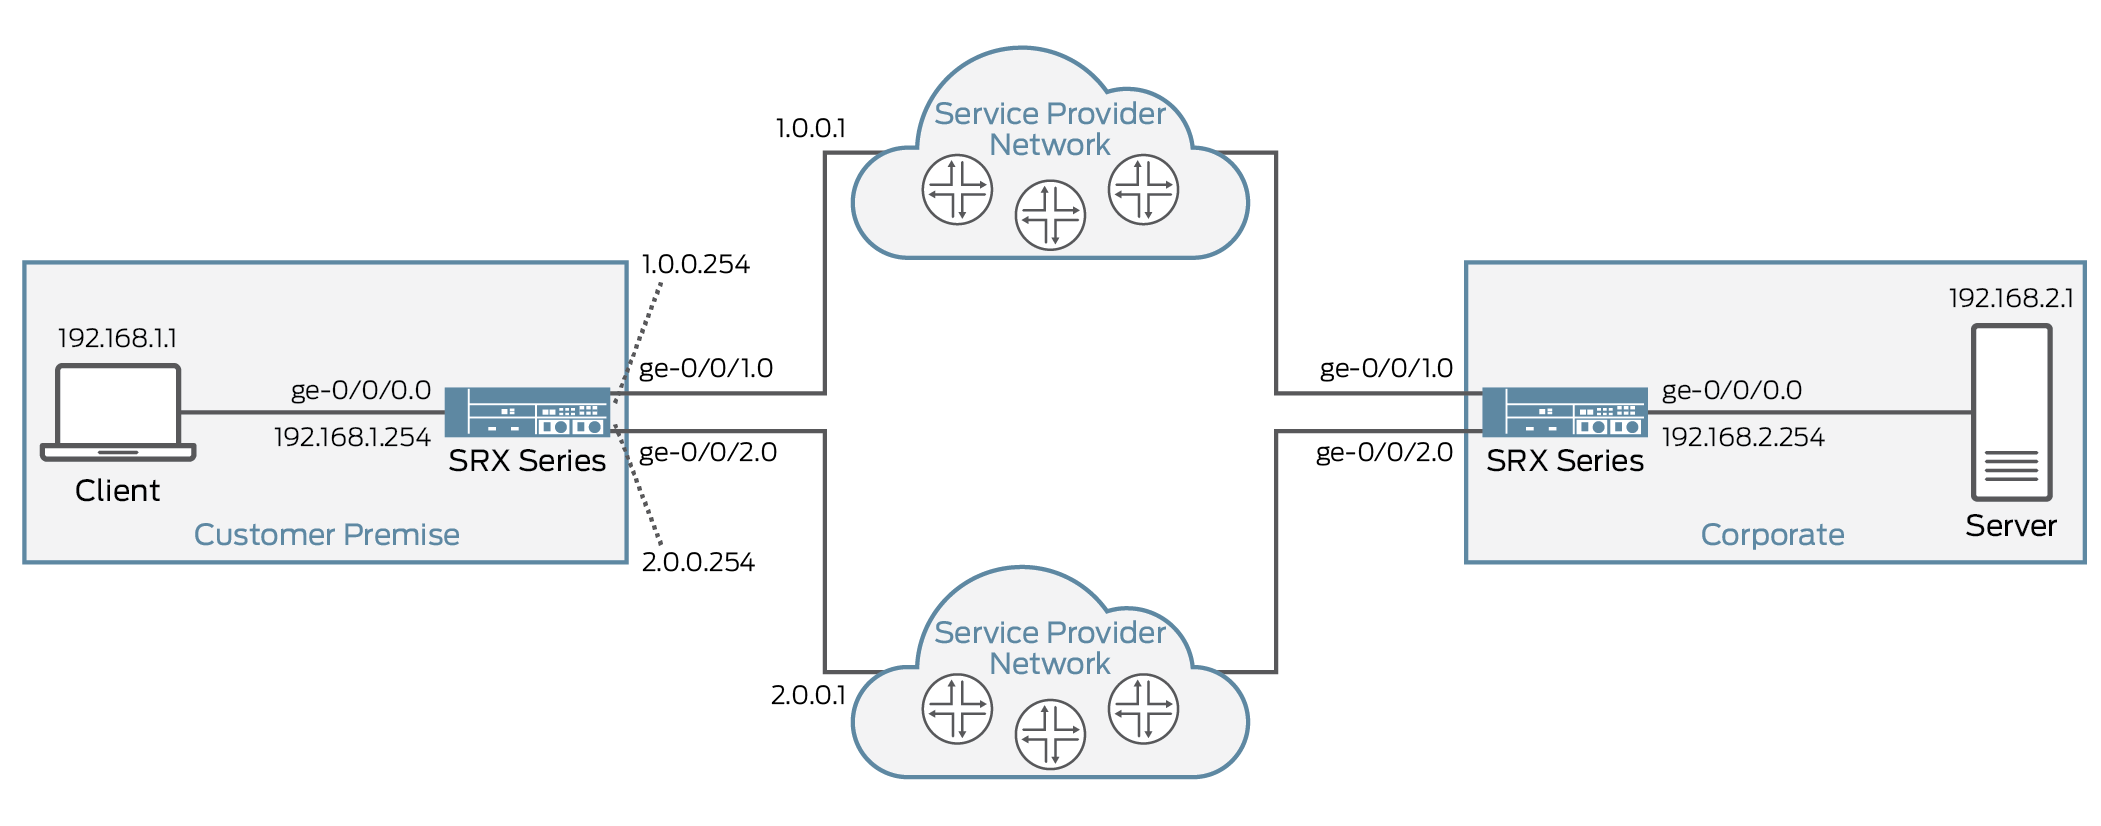 Topology For Advanced Policy-Based Routing (APBR)